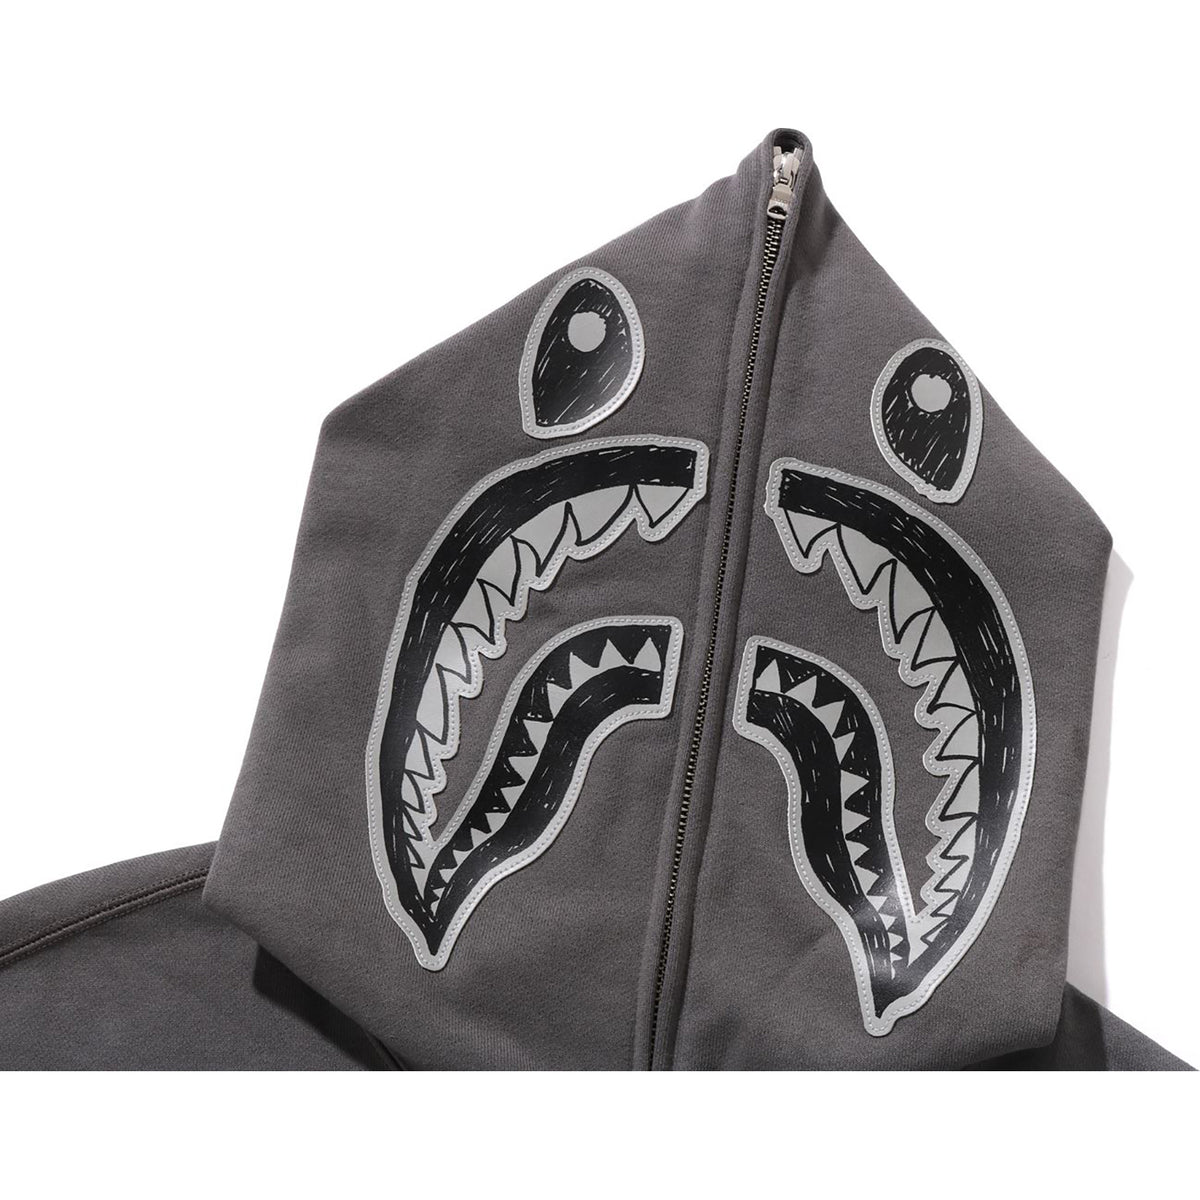 HAND DRAWN FACE RELAXED FIT SHARK FULL ZIP HOODIE MENS